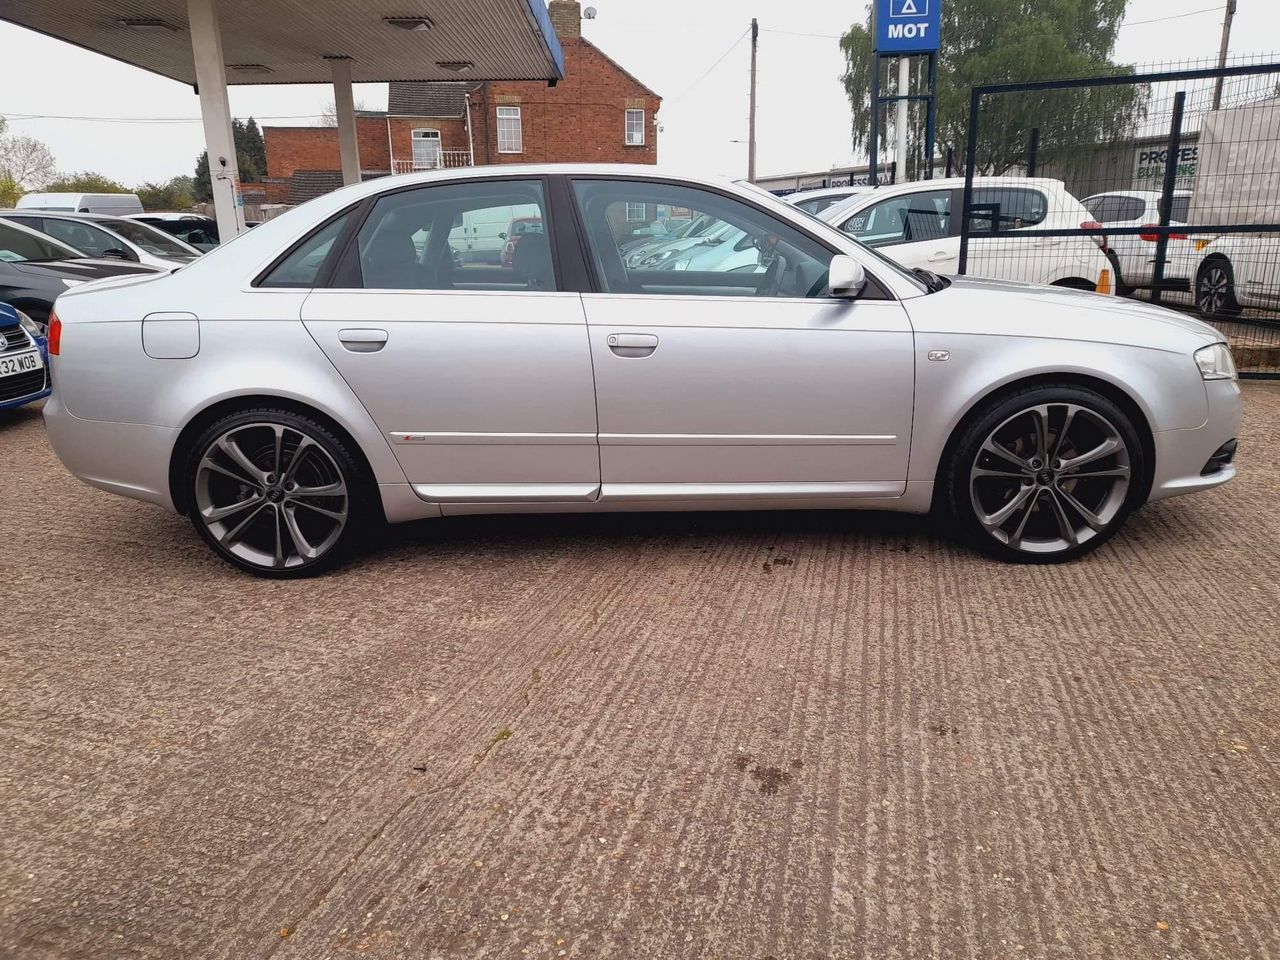 2008 Audi A4 2.0 TDI S line CVT 4dr - Picture 4 of 50